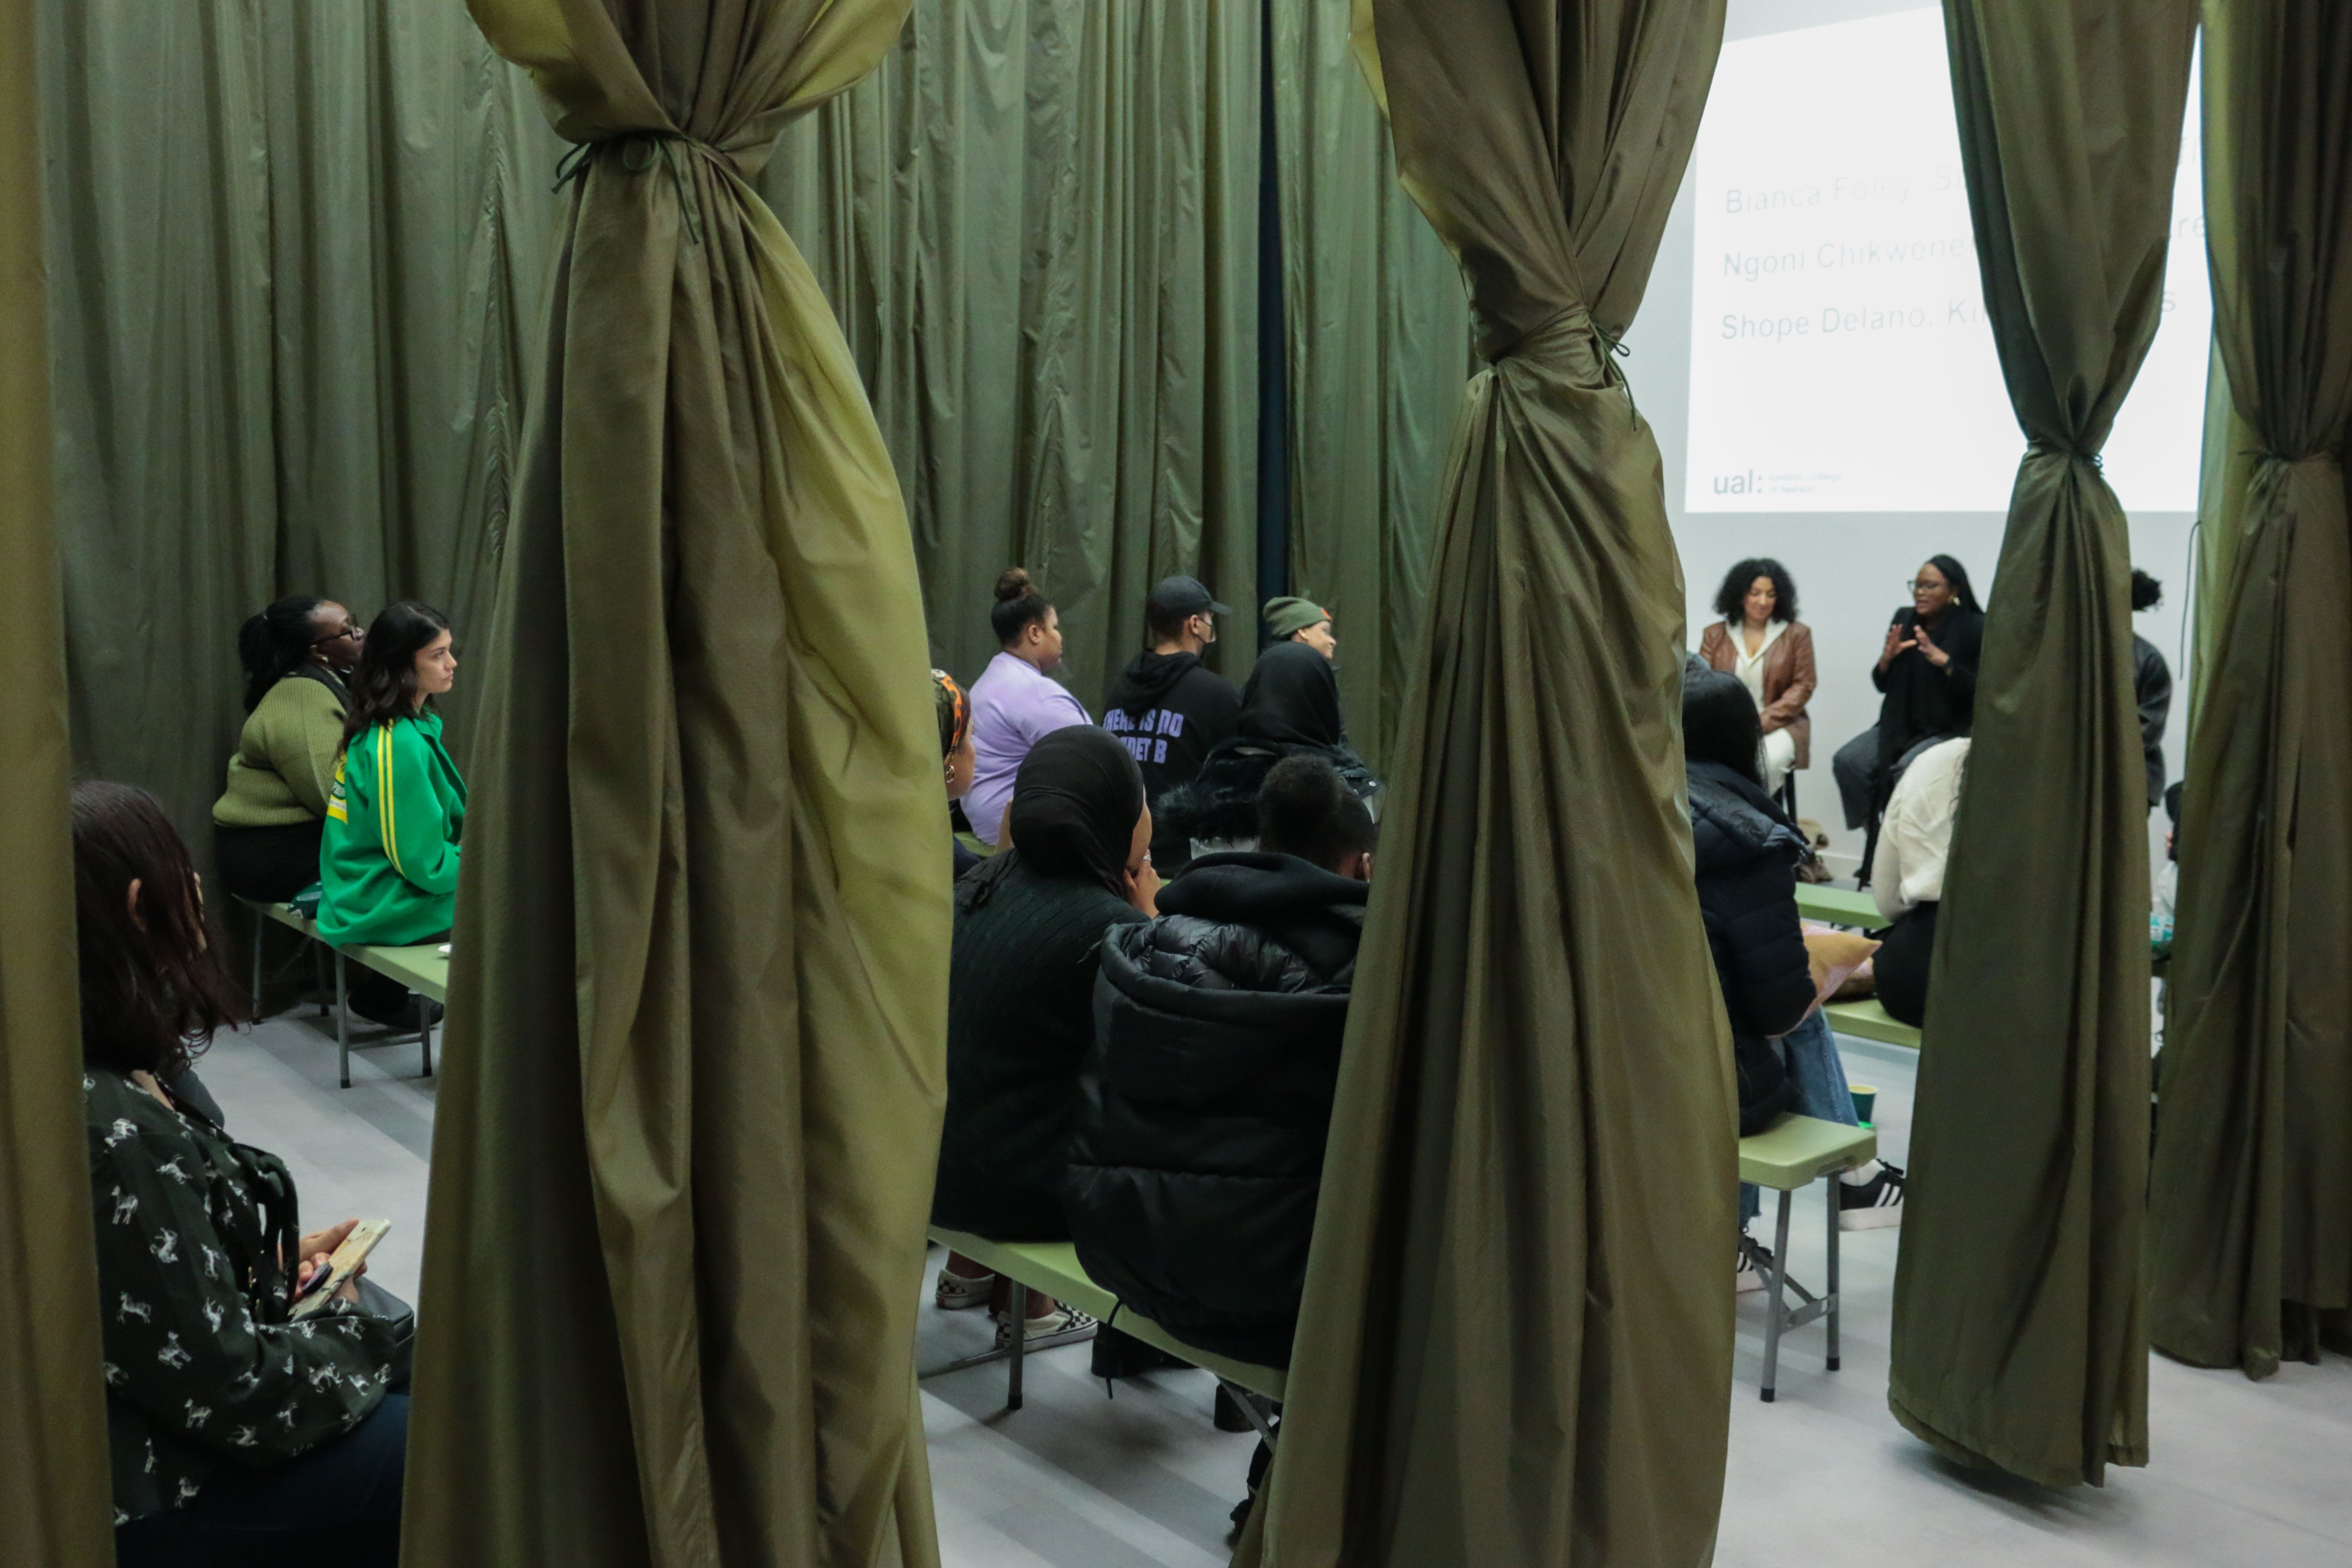 view of listening audience through green curtains